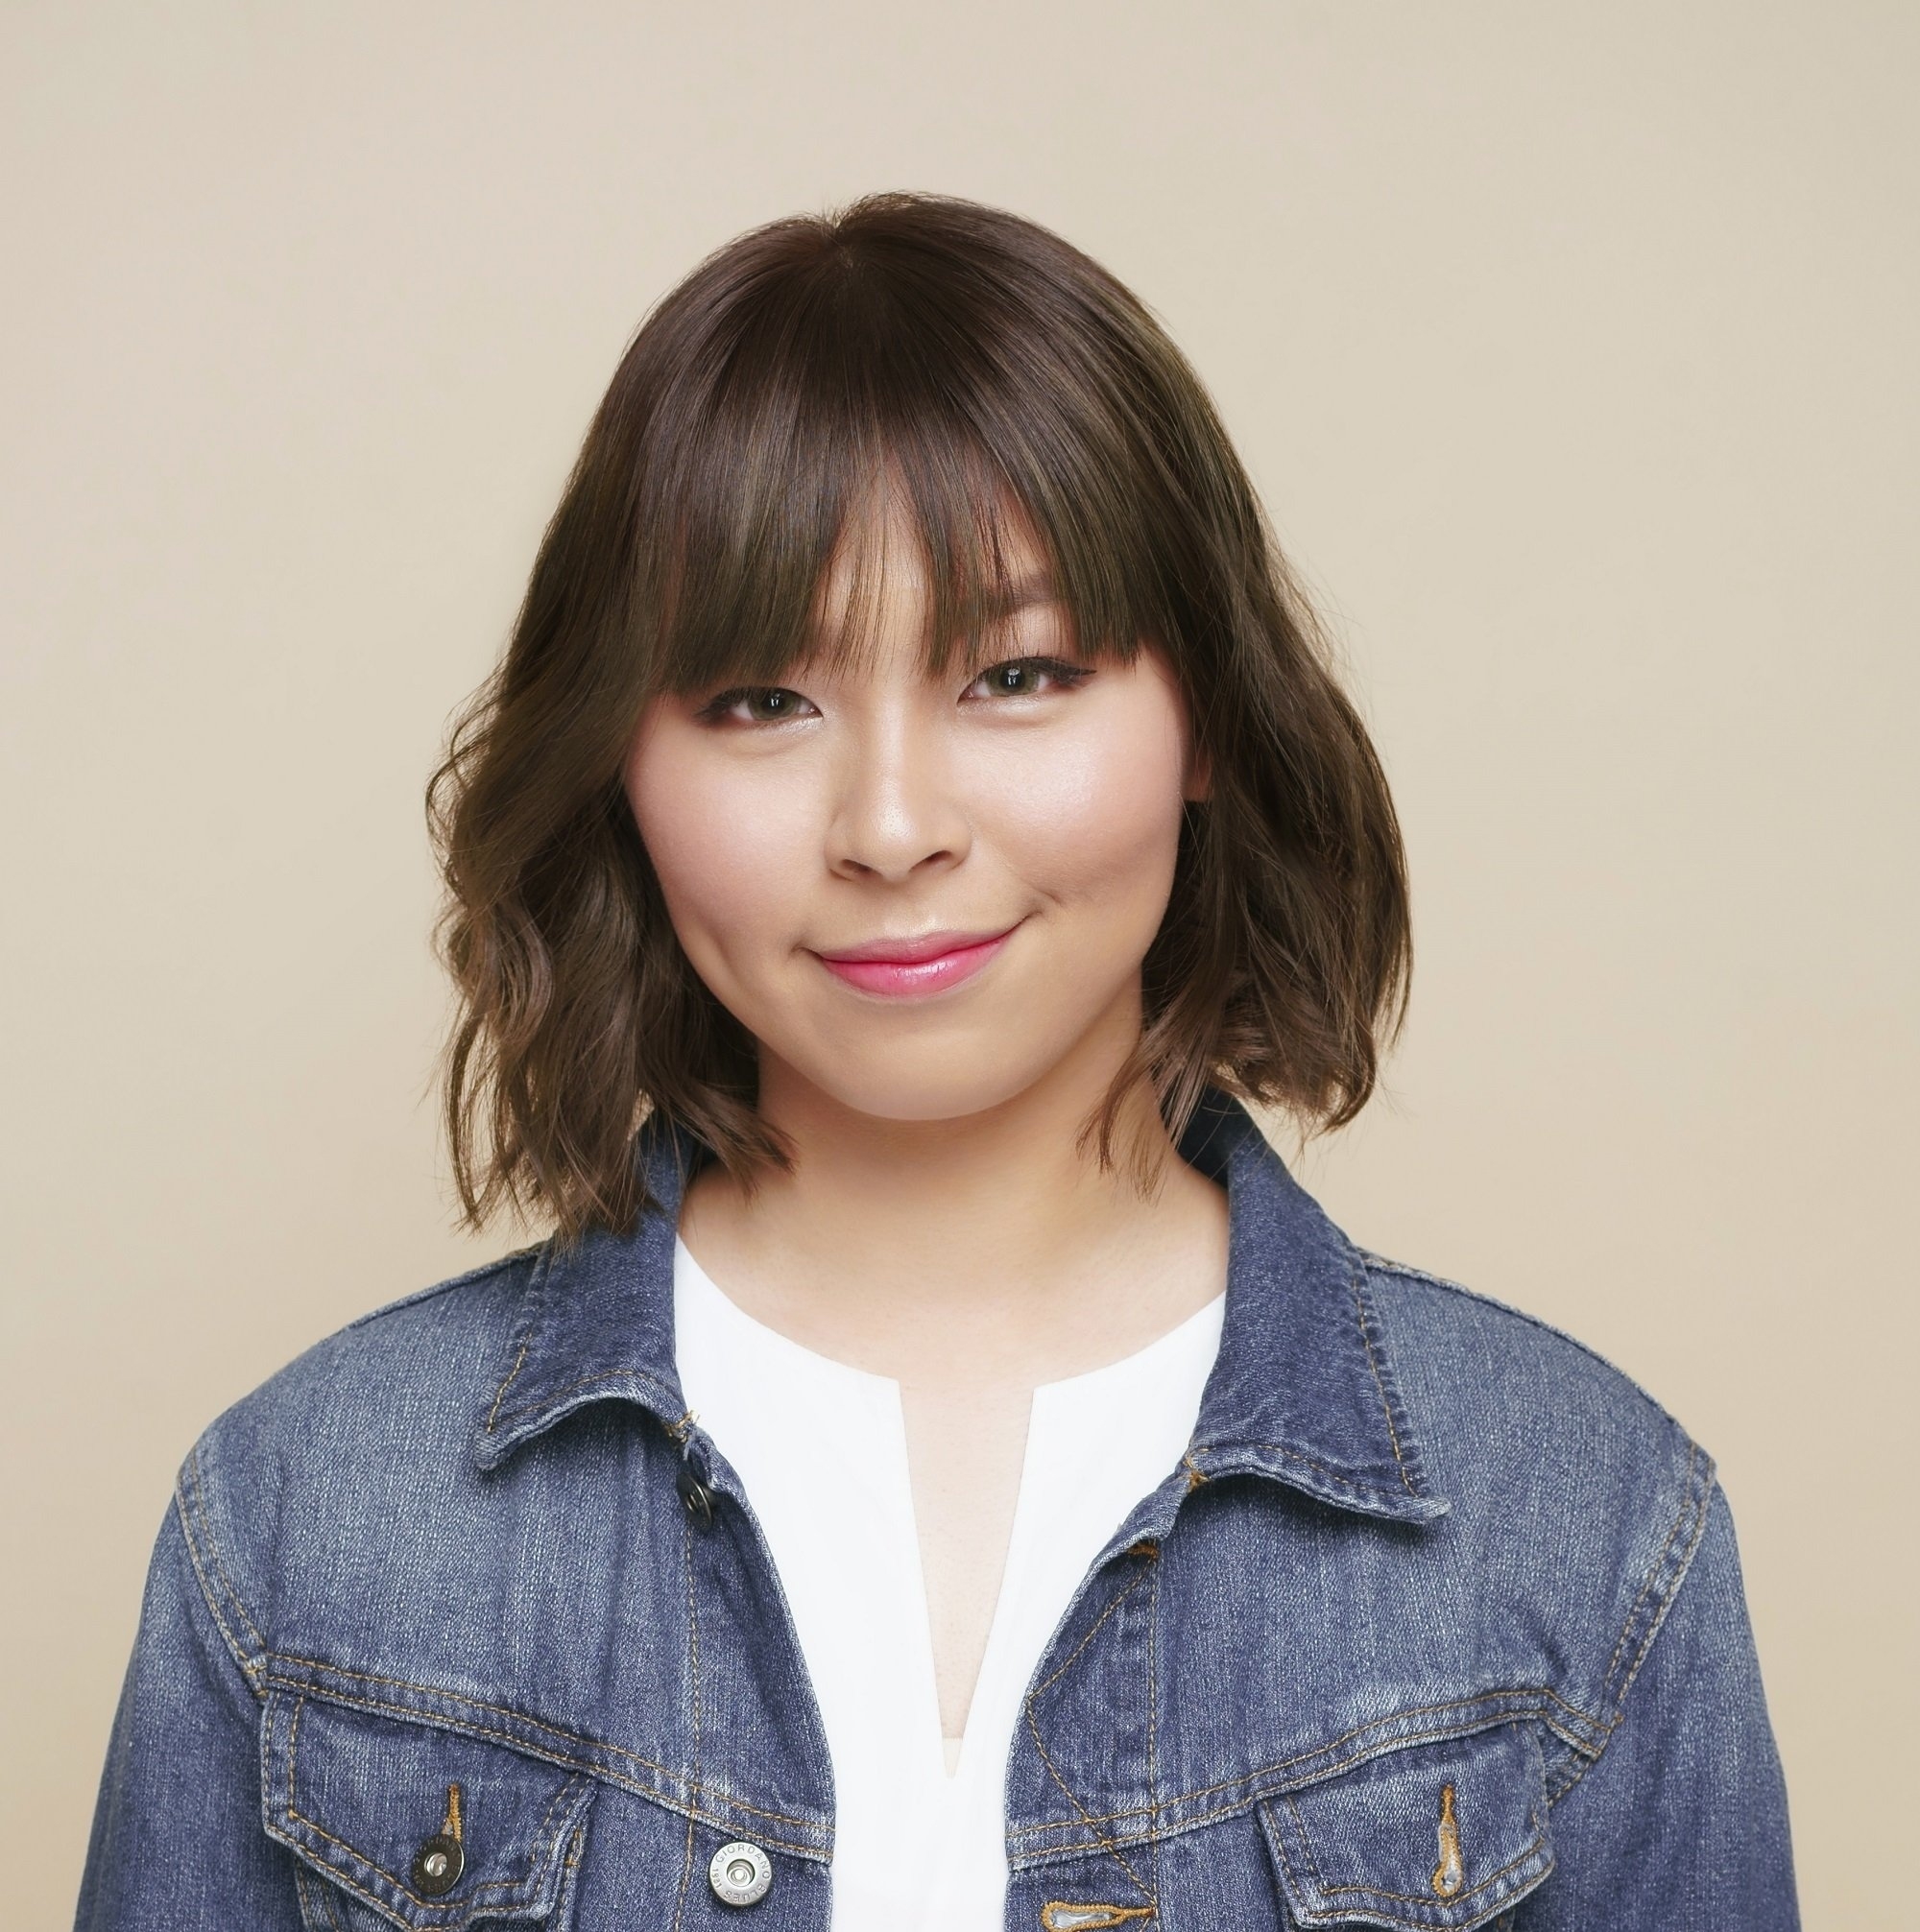 Short Hair For Round Face: Chic Ideas You Need To Try pertaining to Short Hairstyle For Round Face Asian Girl